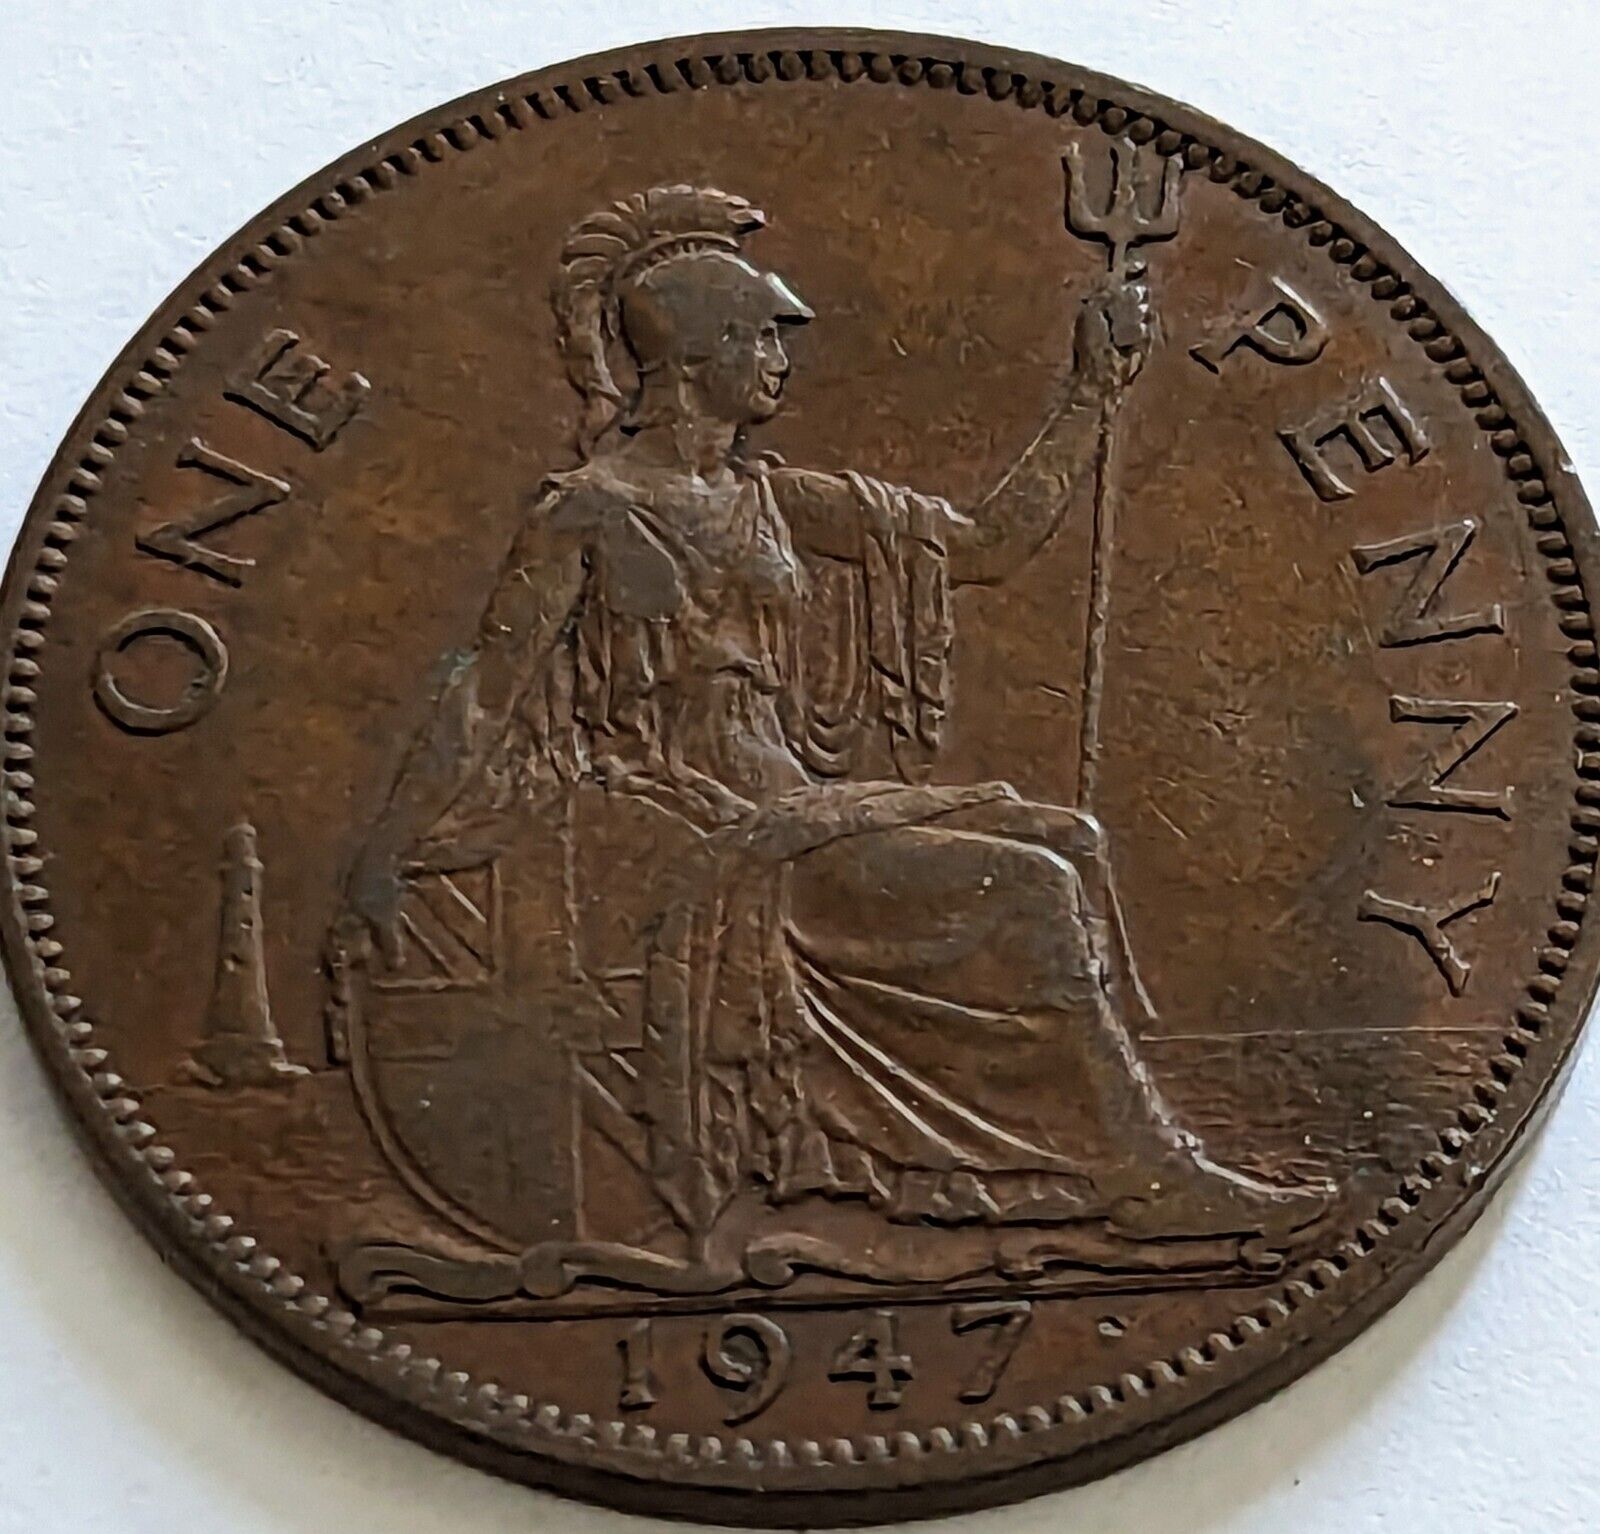 Rare 1947 UK One Penny